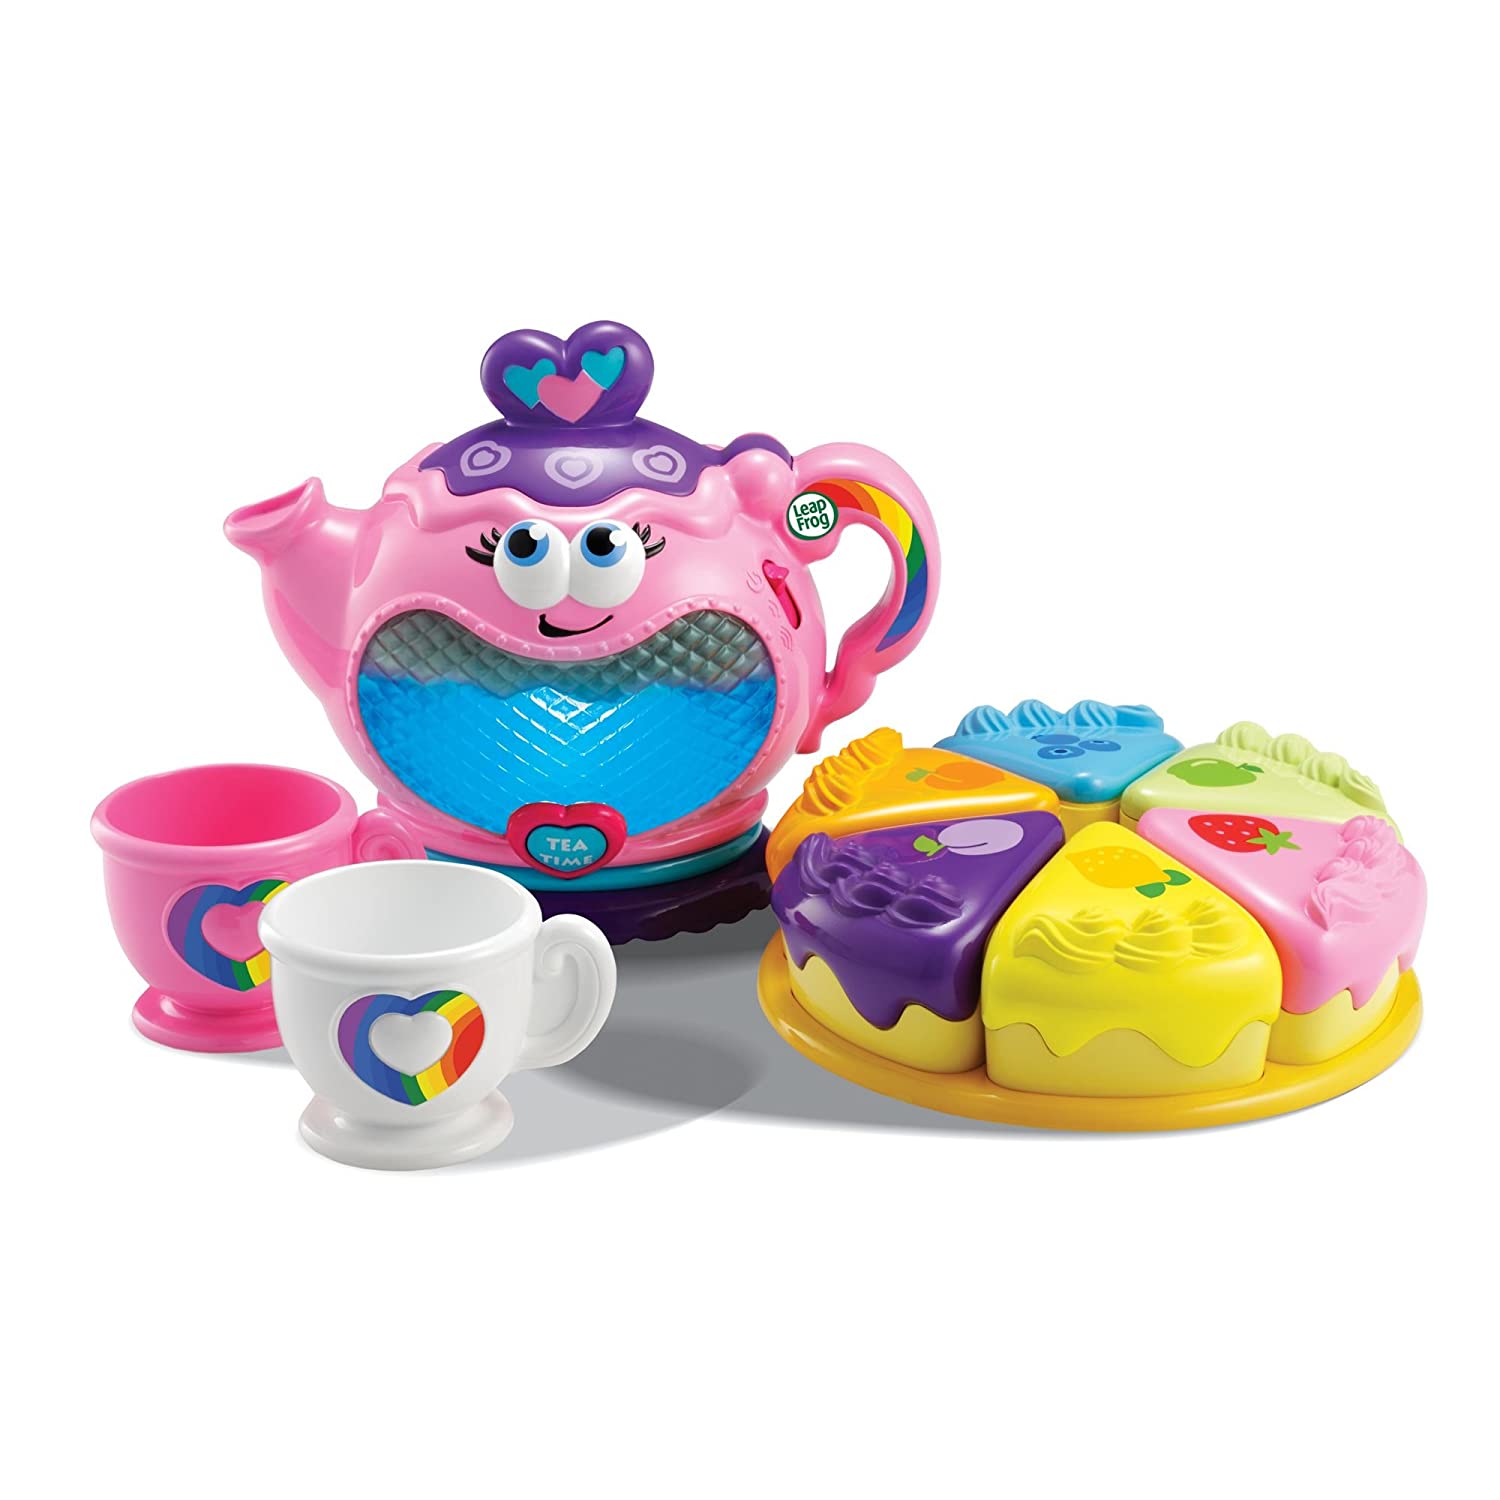 9 Best Kids Tea Sets 2023 - Buying Guide & Reviews 7